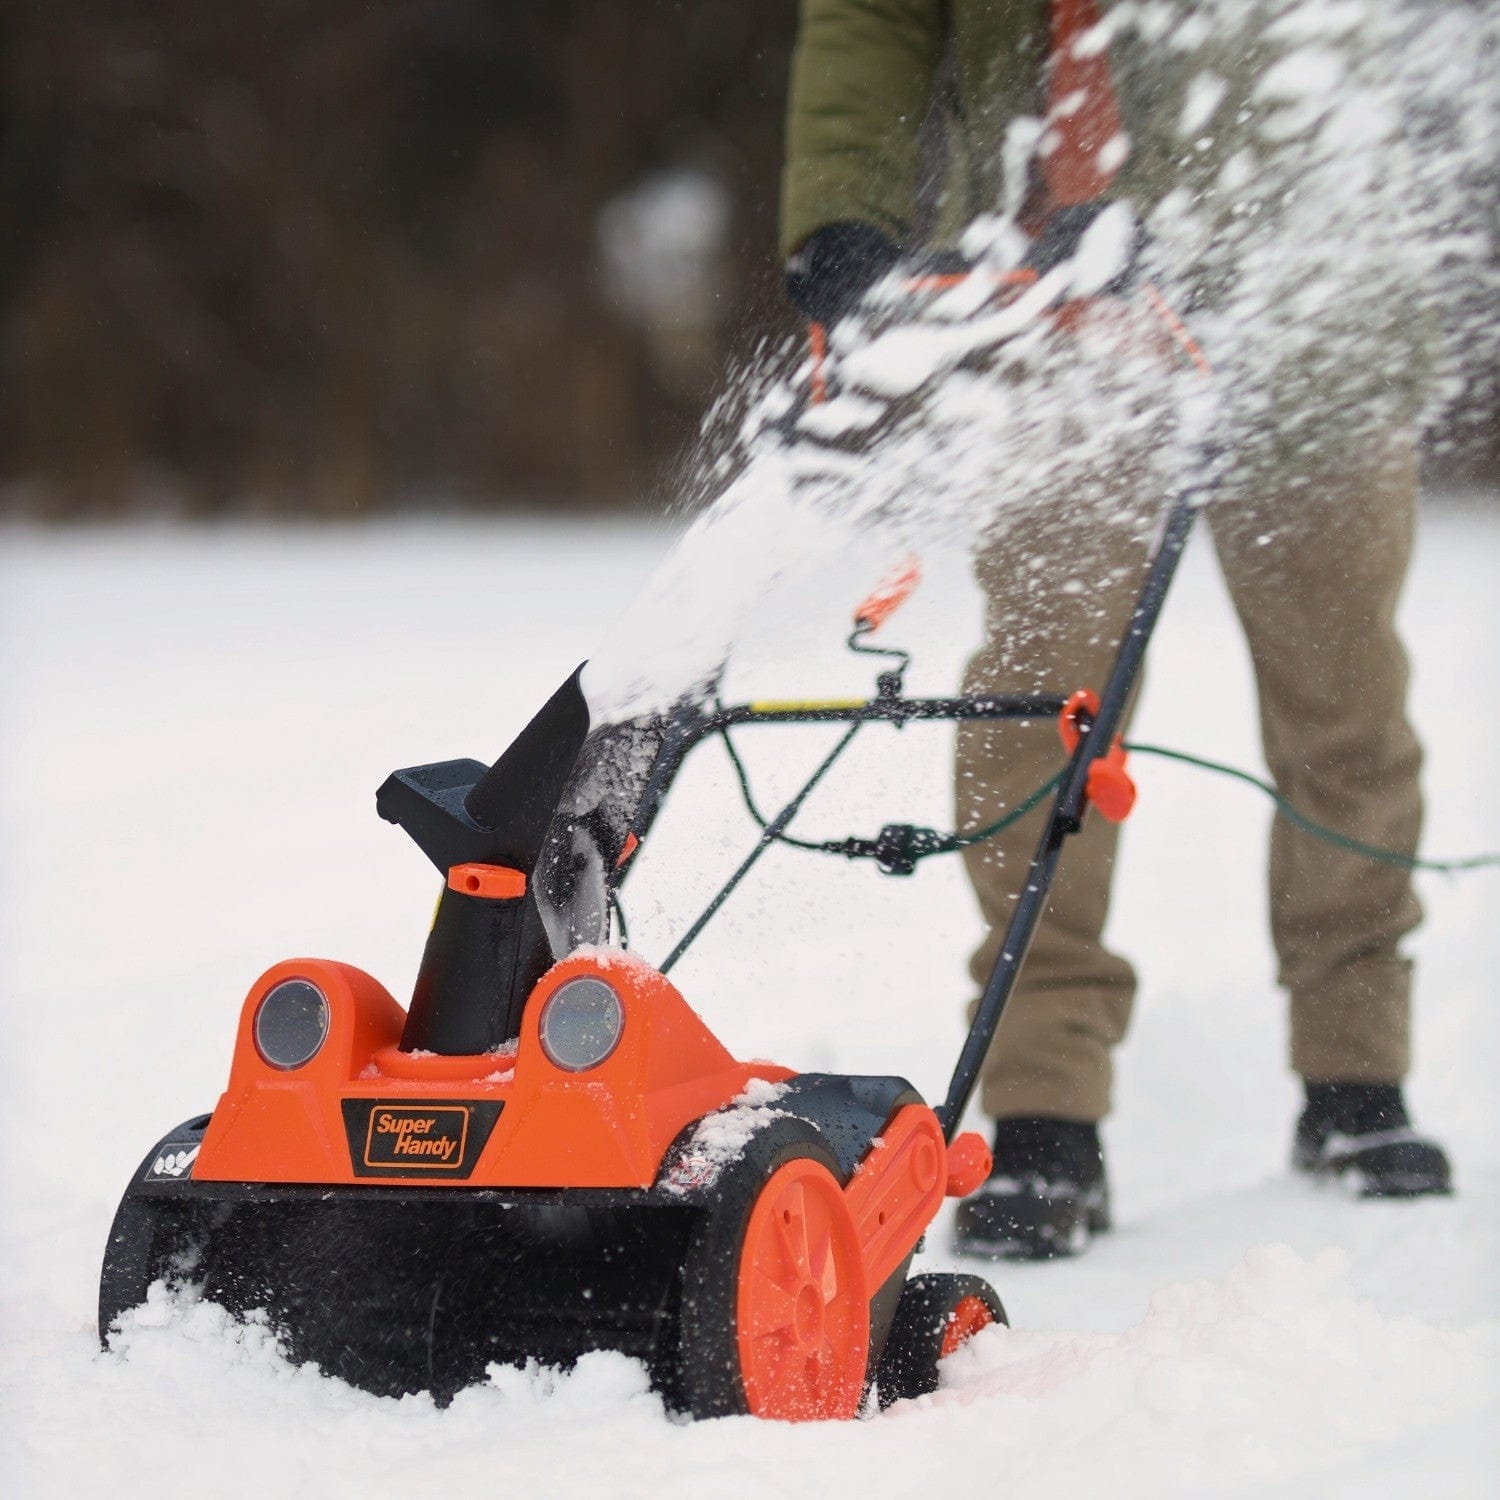 Walk-Behind Electric Snow Blower - 120V Corded, 10 Clearing Width   SuperHandy - SuperHandy - Shop Outdoor Power Equipment & Mobility